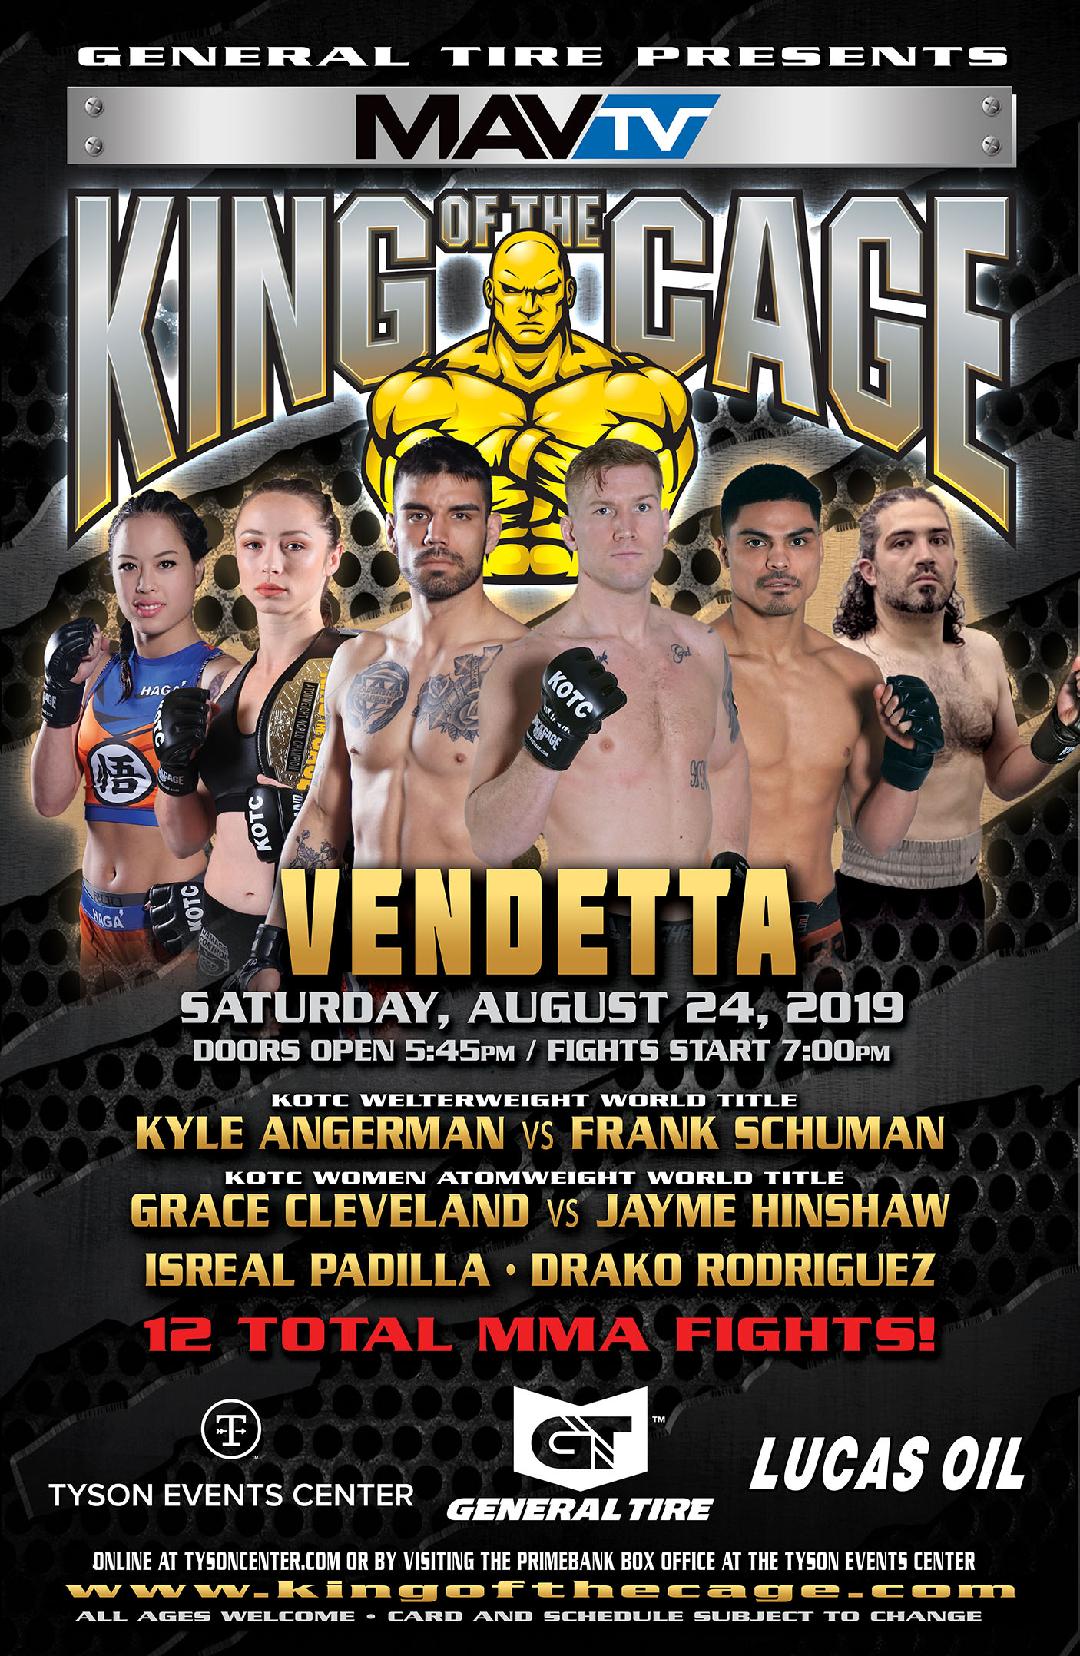 King of the Cage Announces Fighters to Headline at Tyson Events Center on August 24 for “VENDETTA”